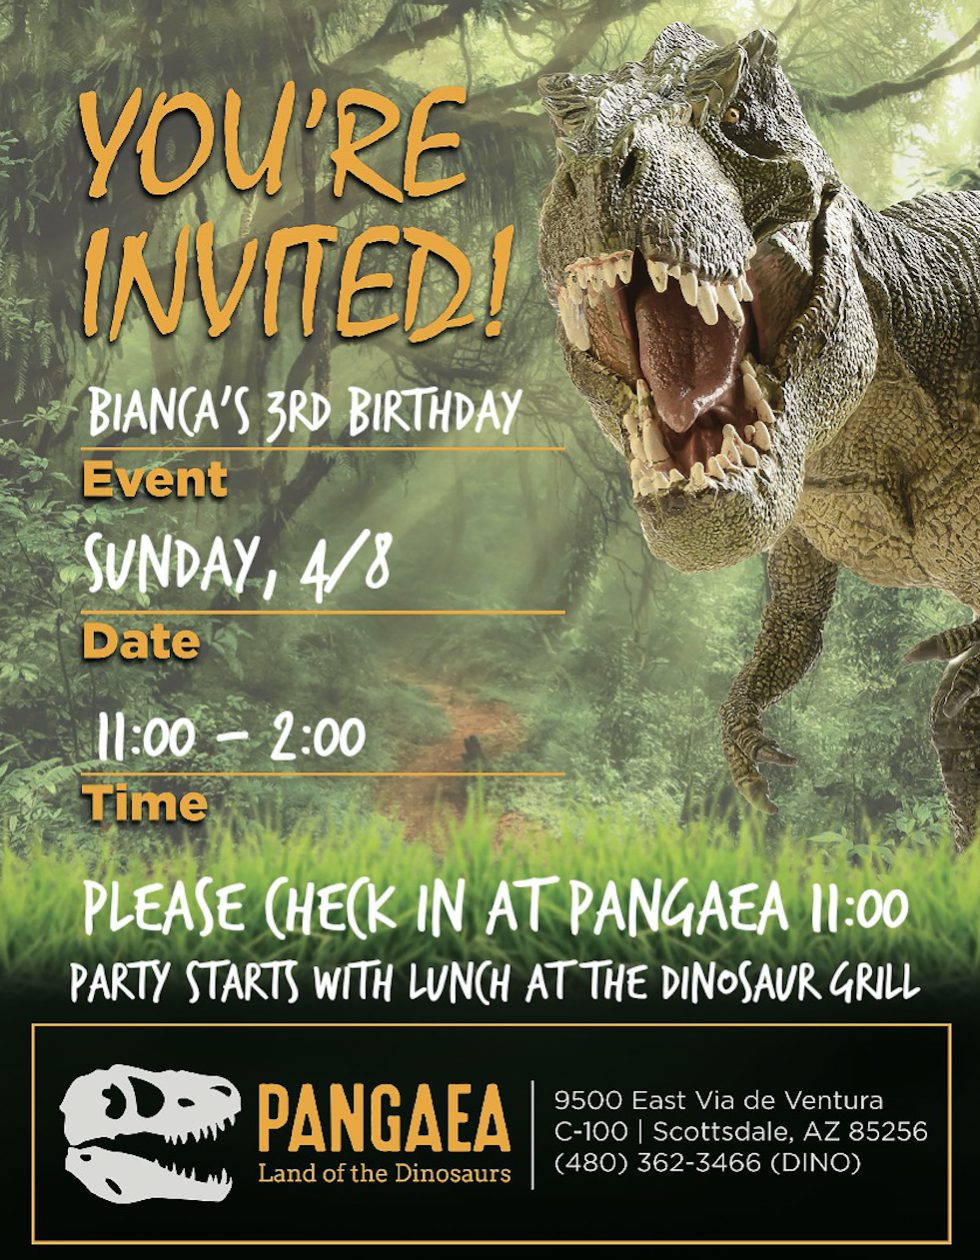 Plan the ultimate dinosaur party with this free dinosaur party printable invitation!